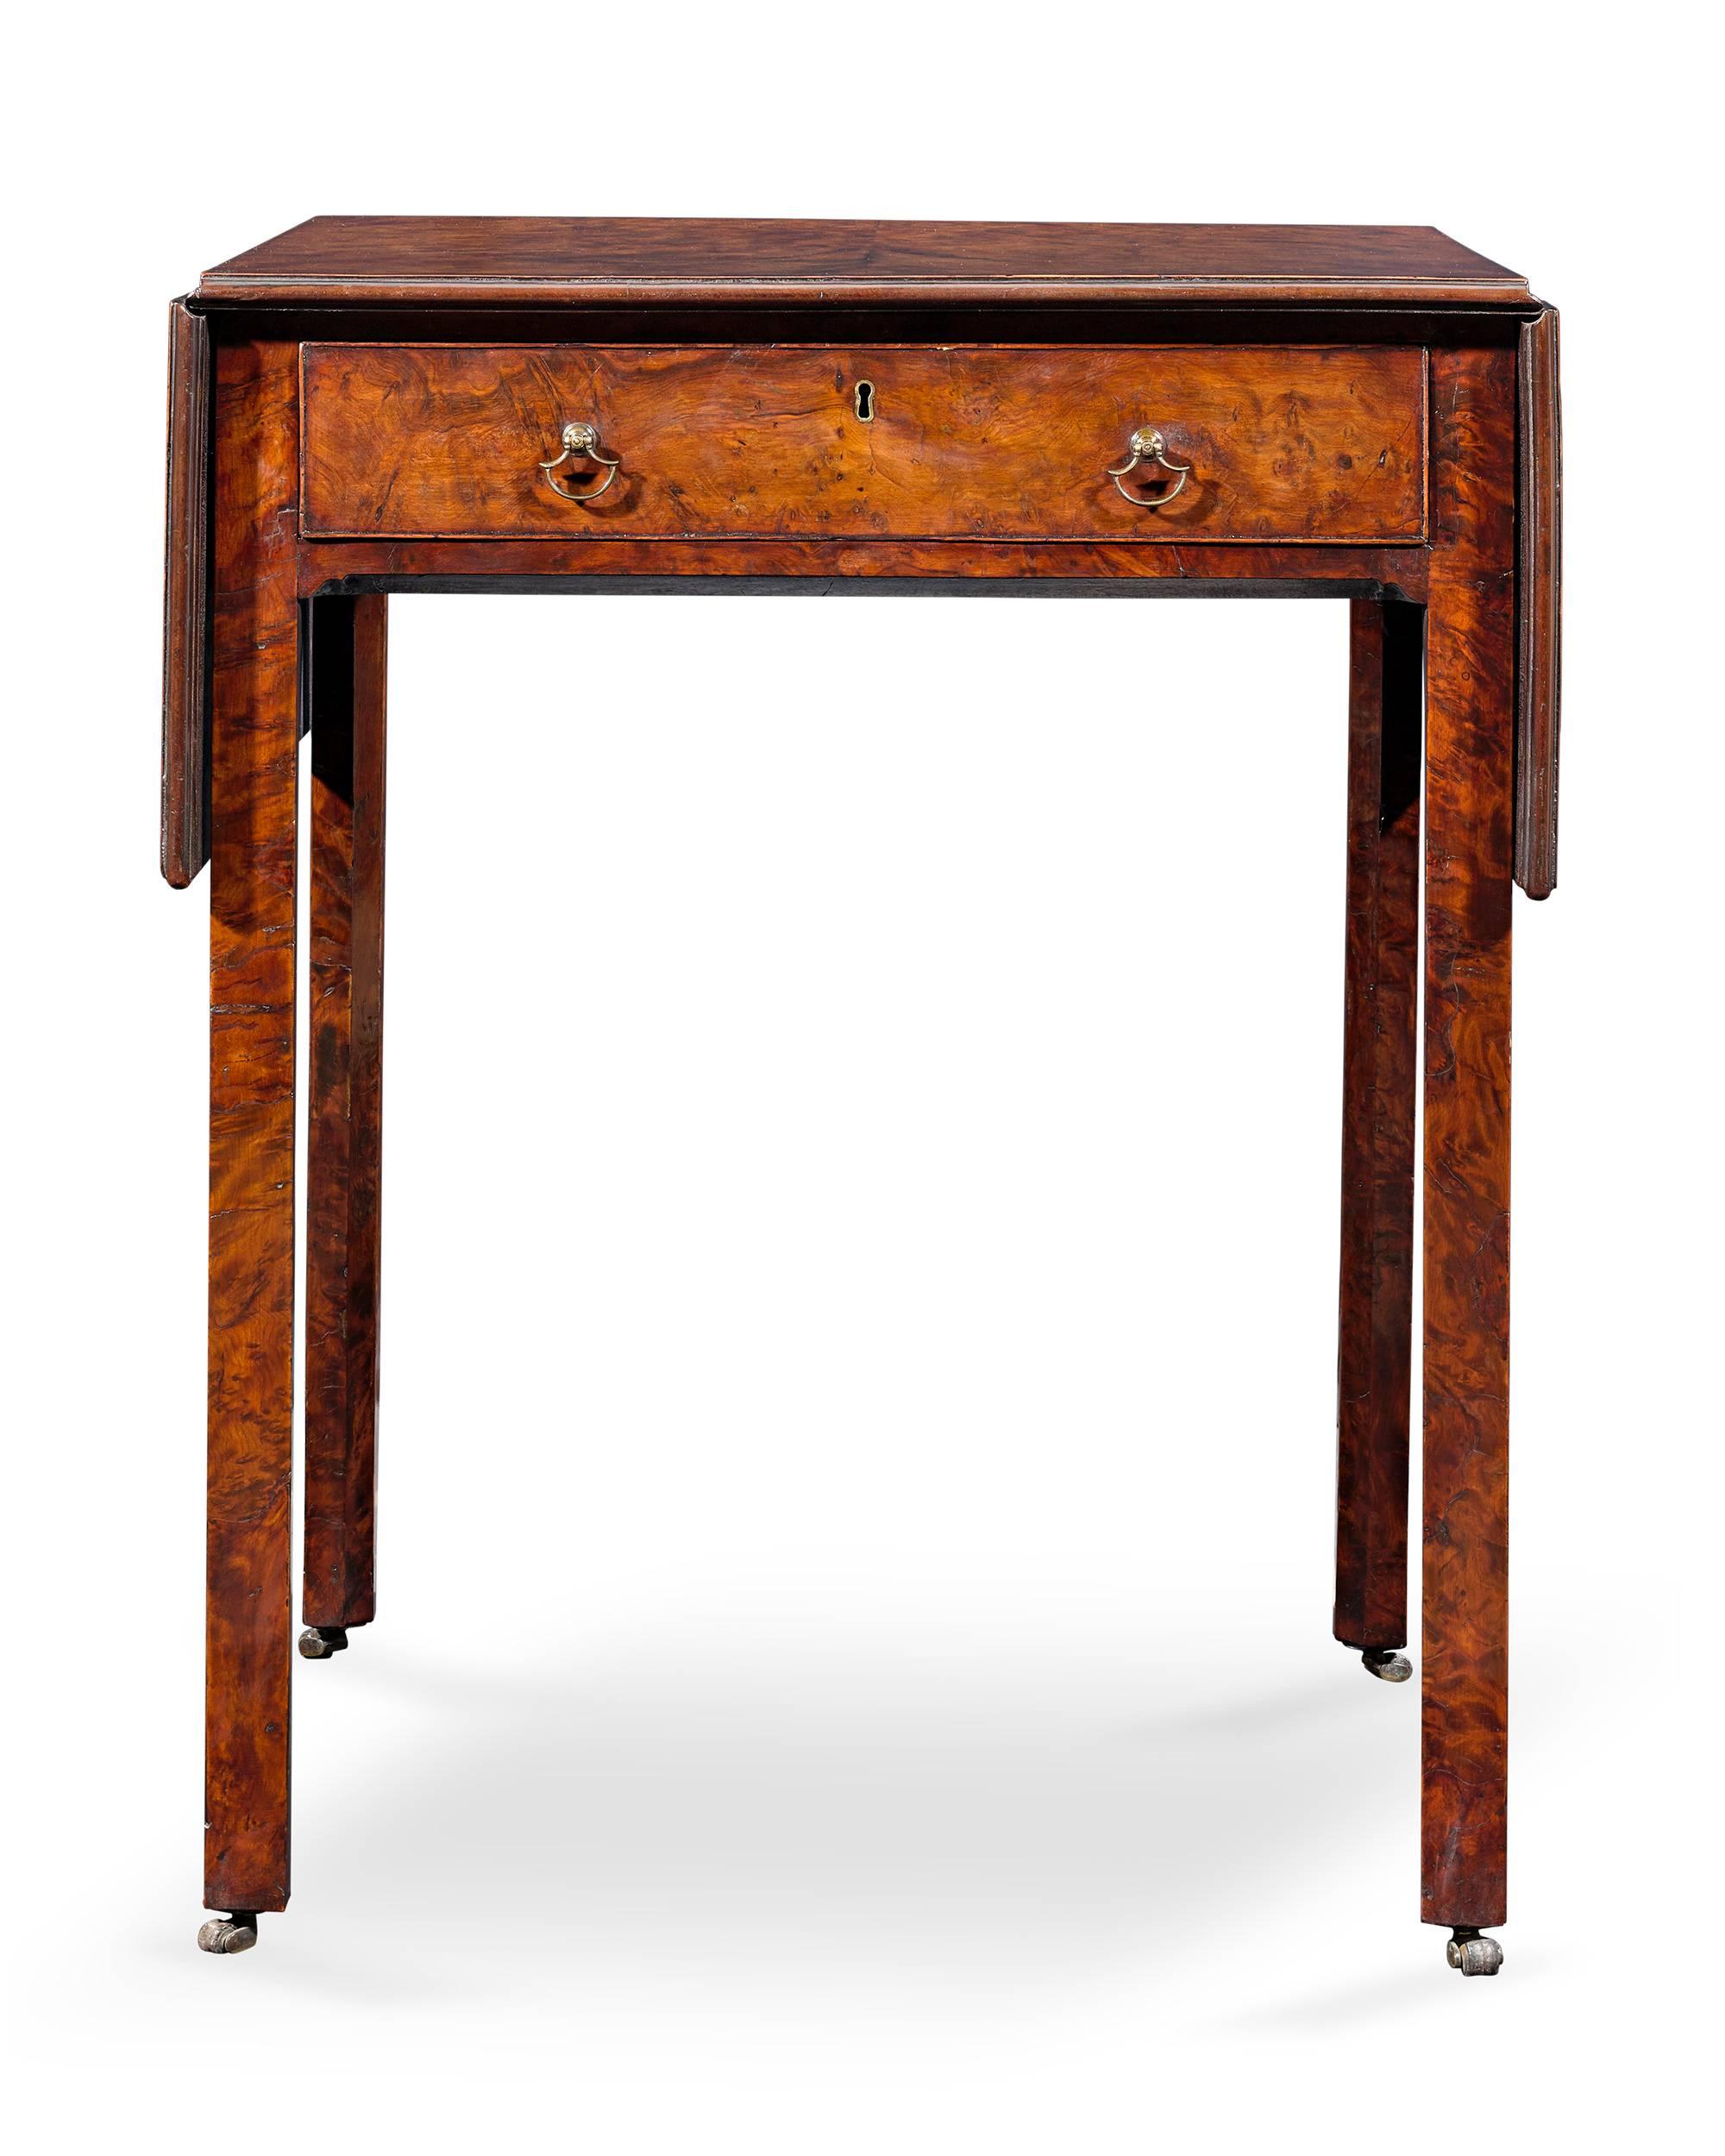 Bearing the characteristics of the legendary Thomas Chippendale is this rare George II-period Pembroke table. Veneered entirely in burr yew wood, this table is a sight to behold. With its balanced design, beautiful proportions, rich patina and